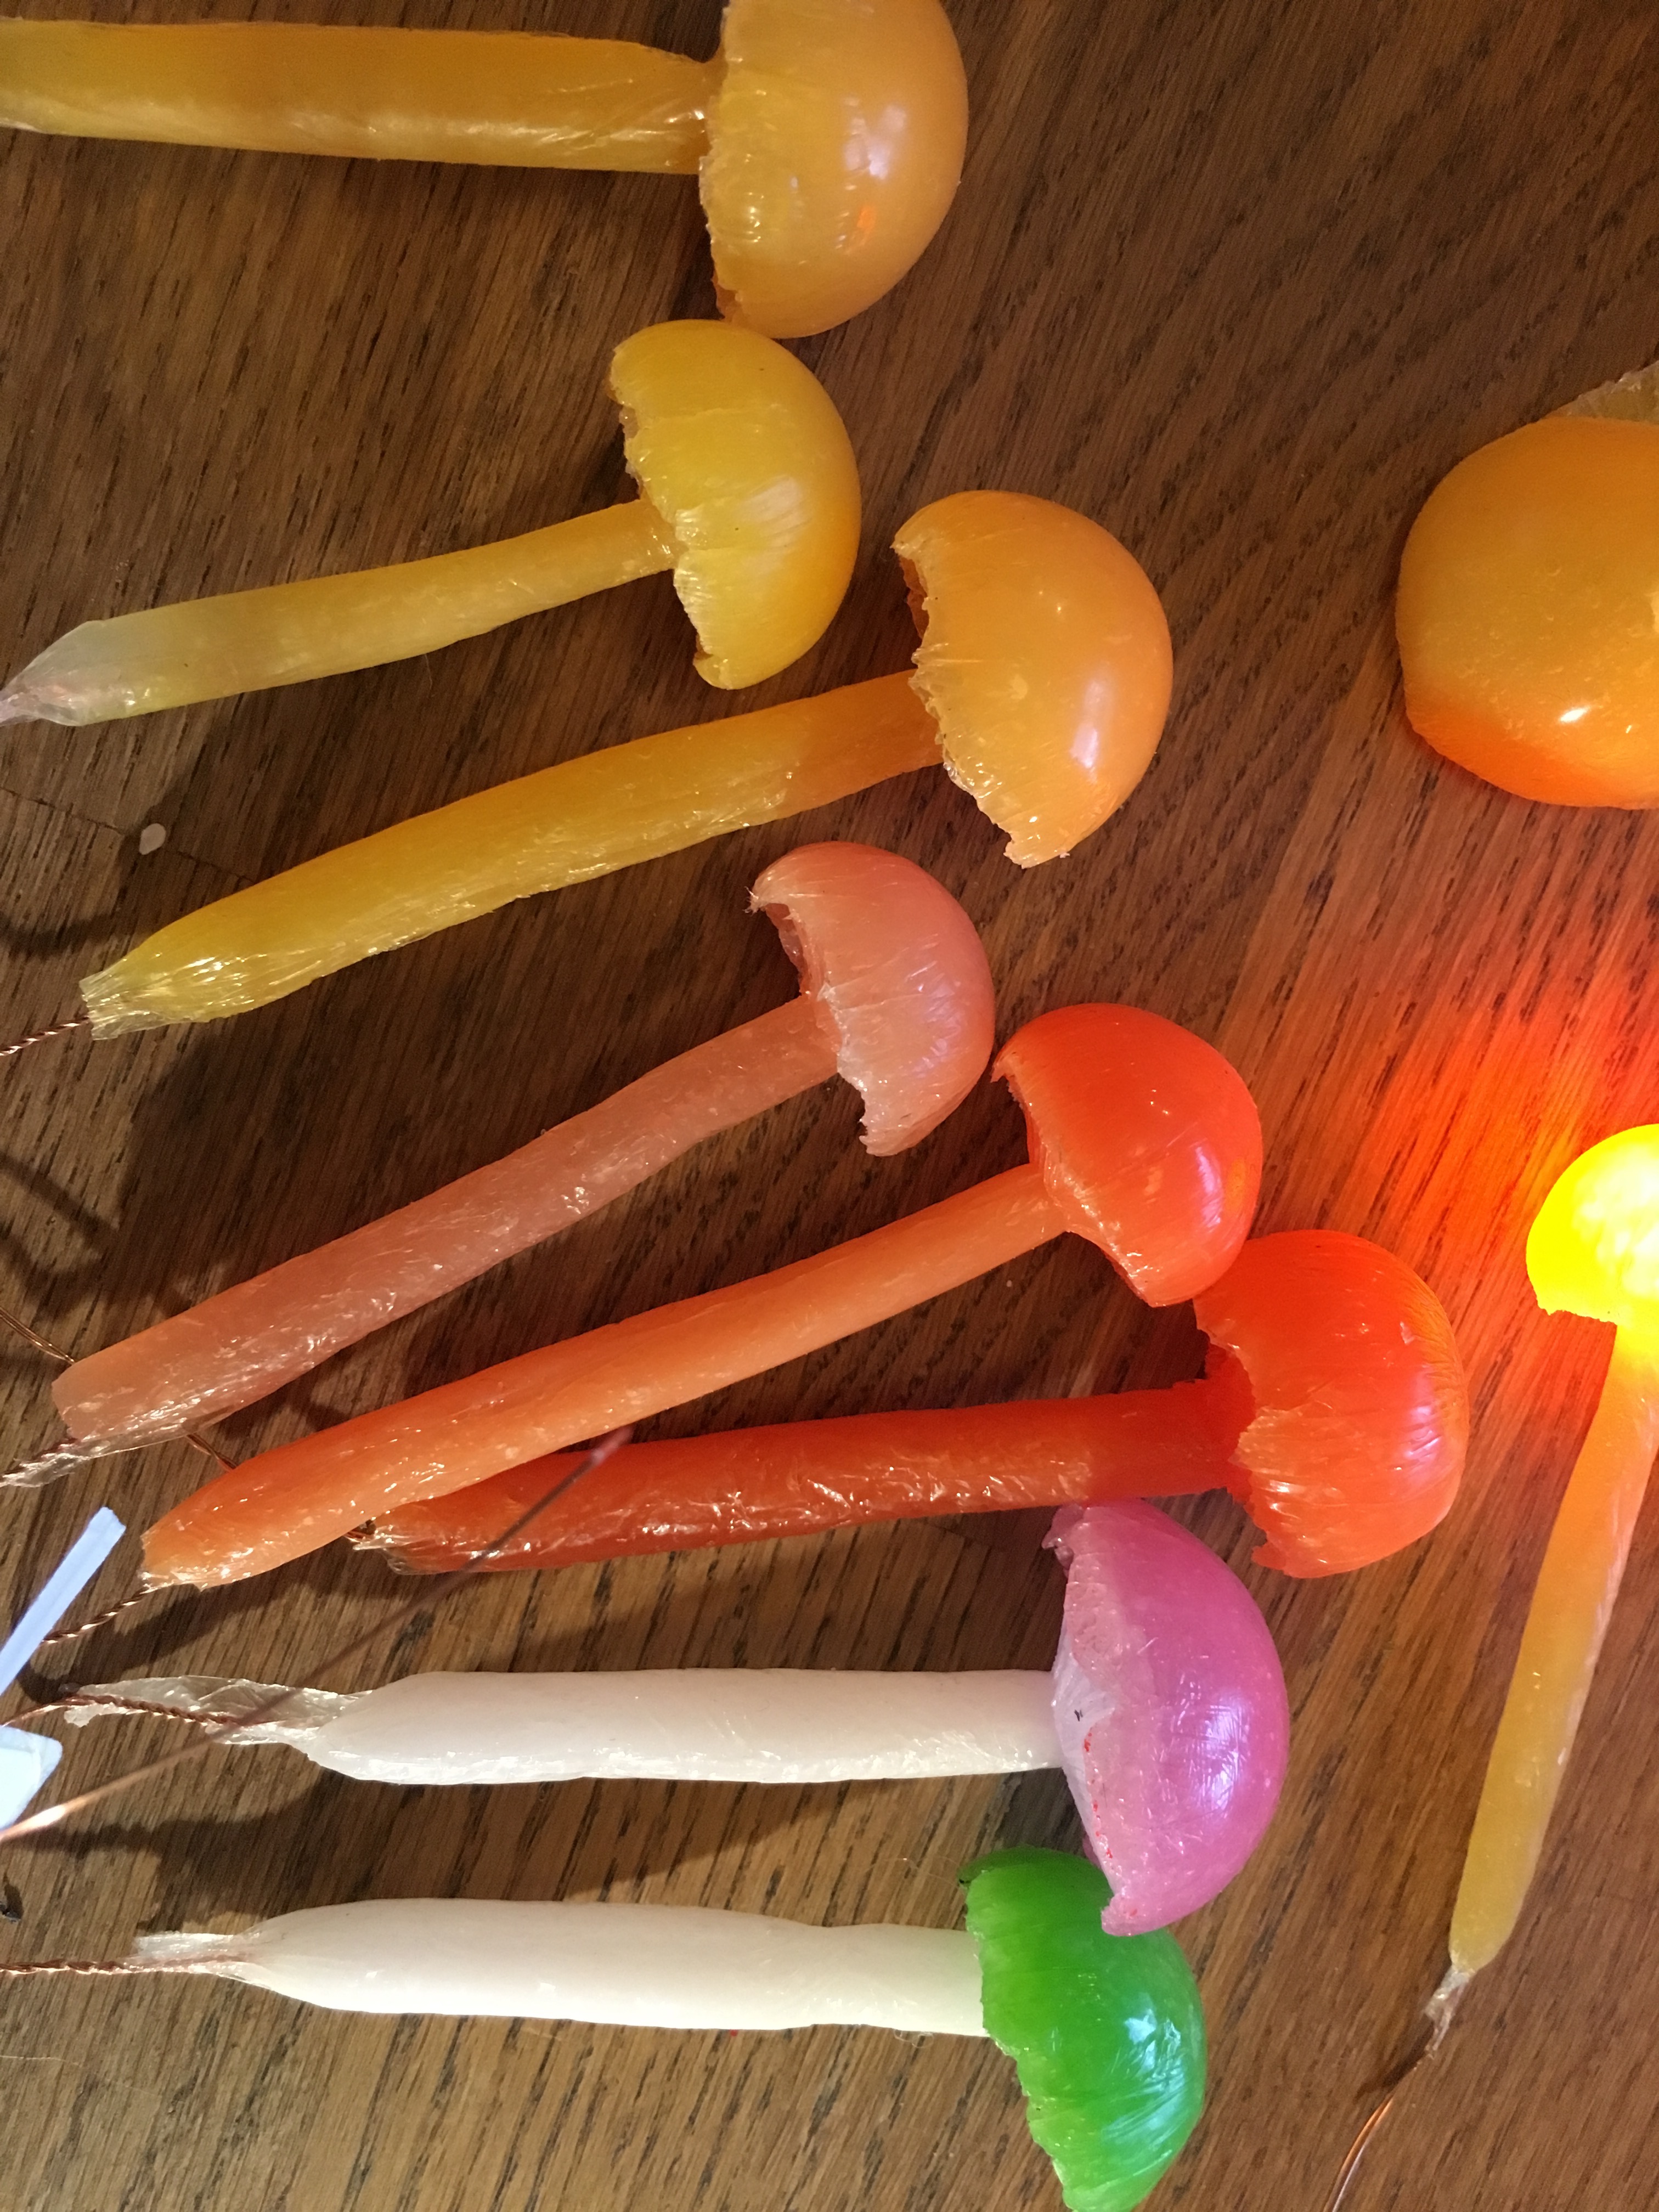 Several multi-coloured mushrooms lie on a table. One glows.